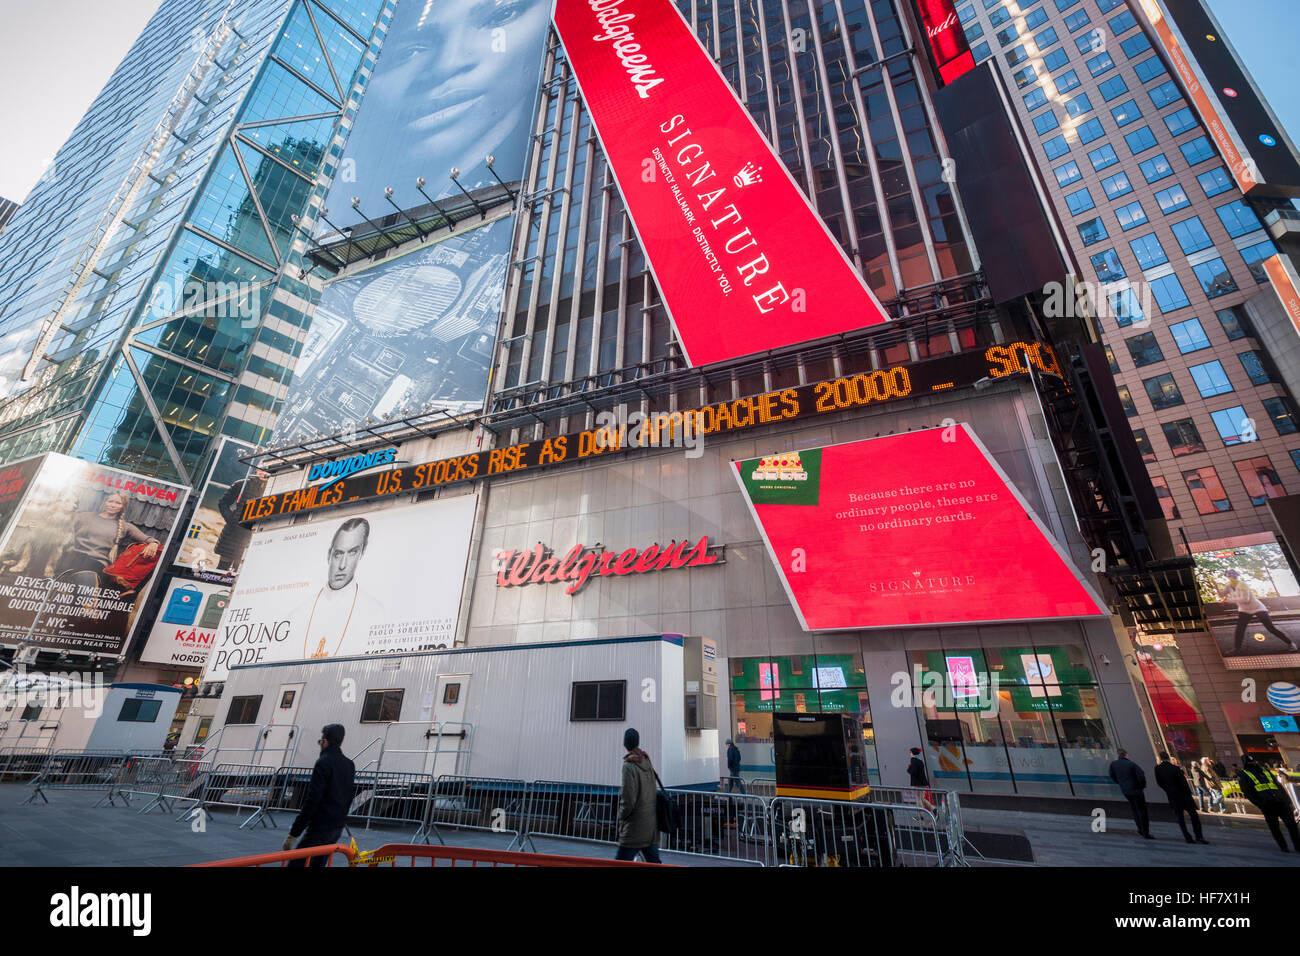 the-news-ticker-in-times-square-in-new-york-on-tuesday-december-20-HF7X1H.jpg